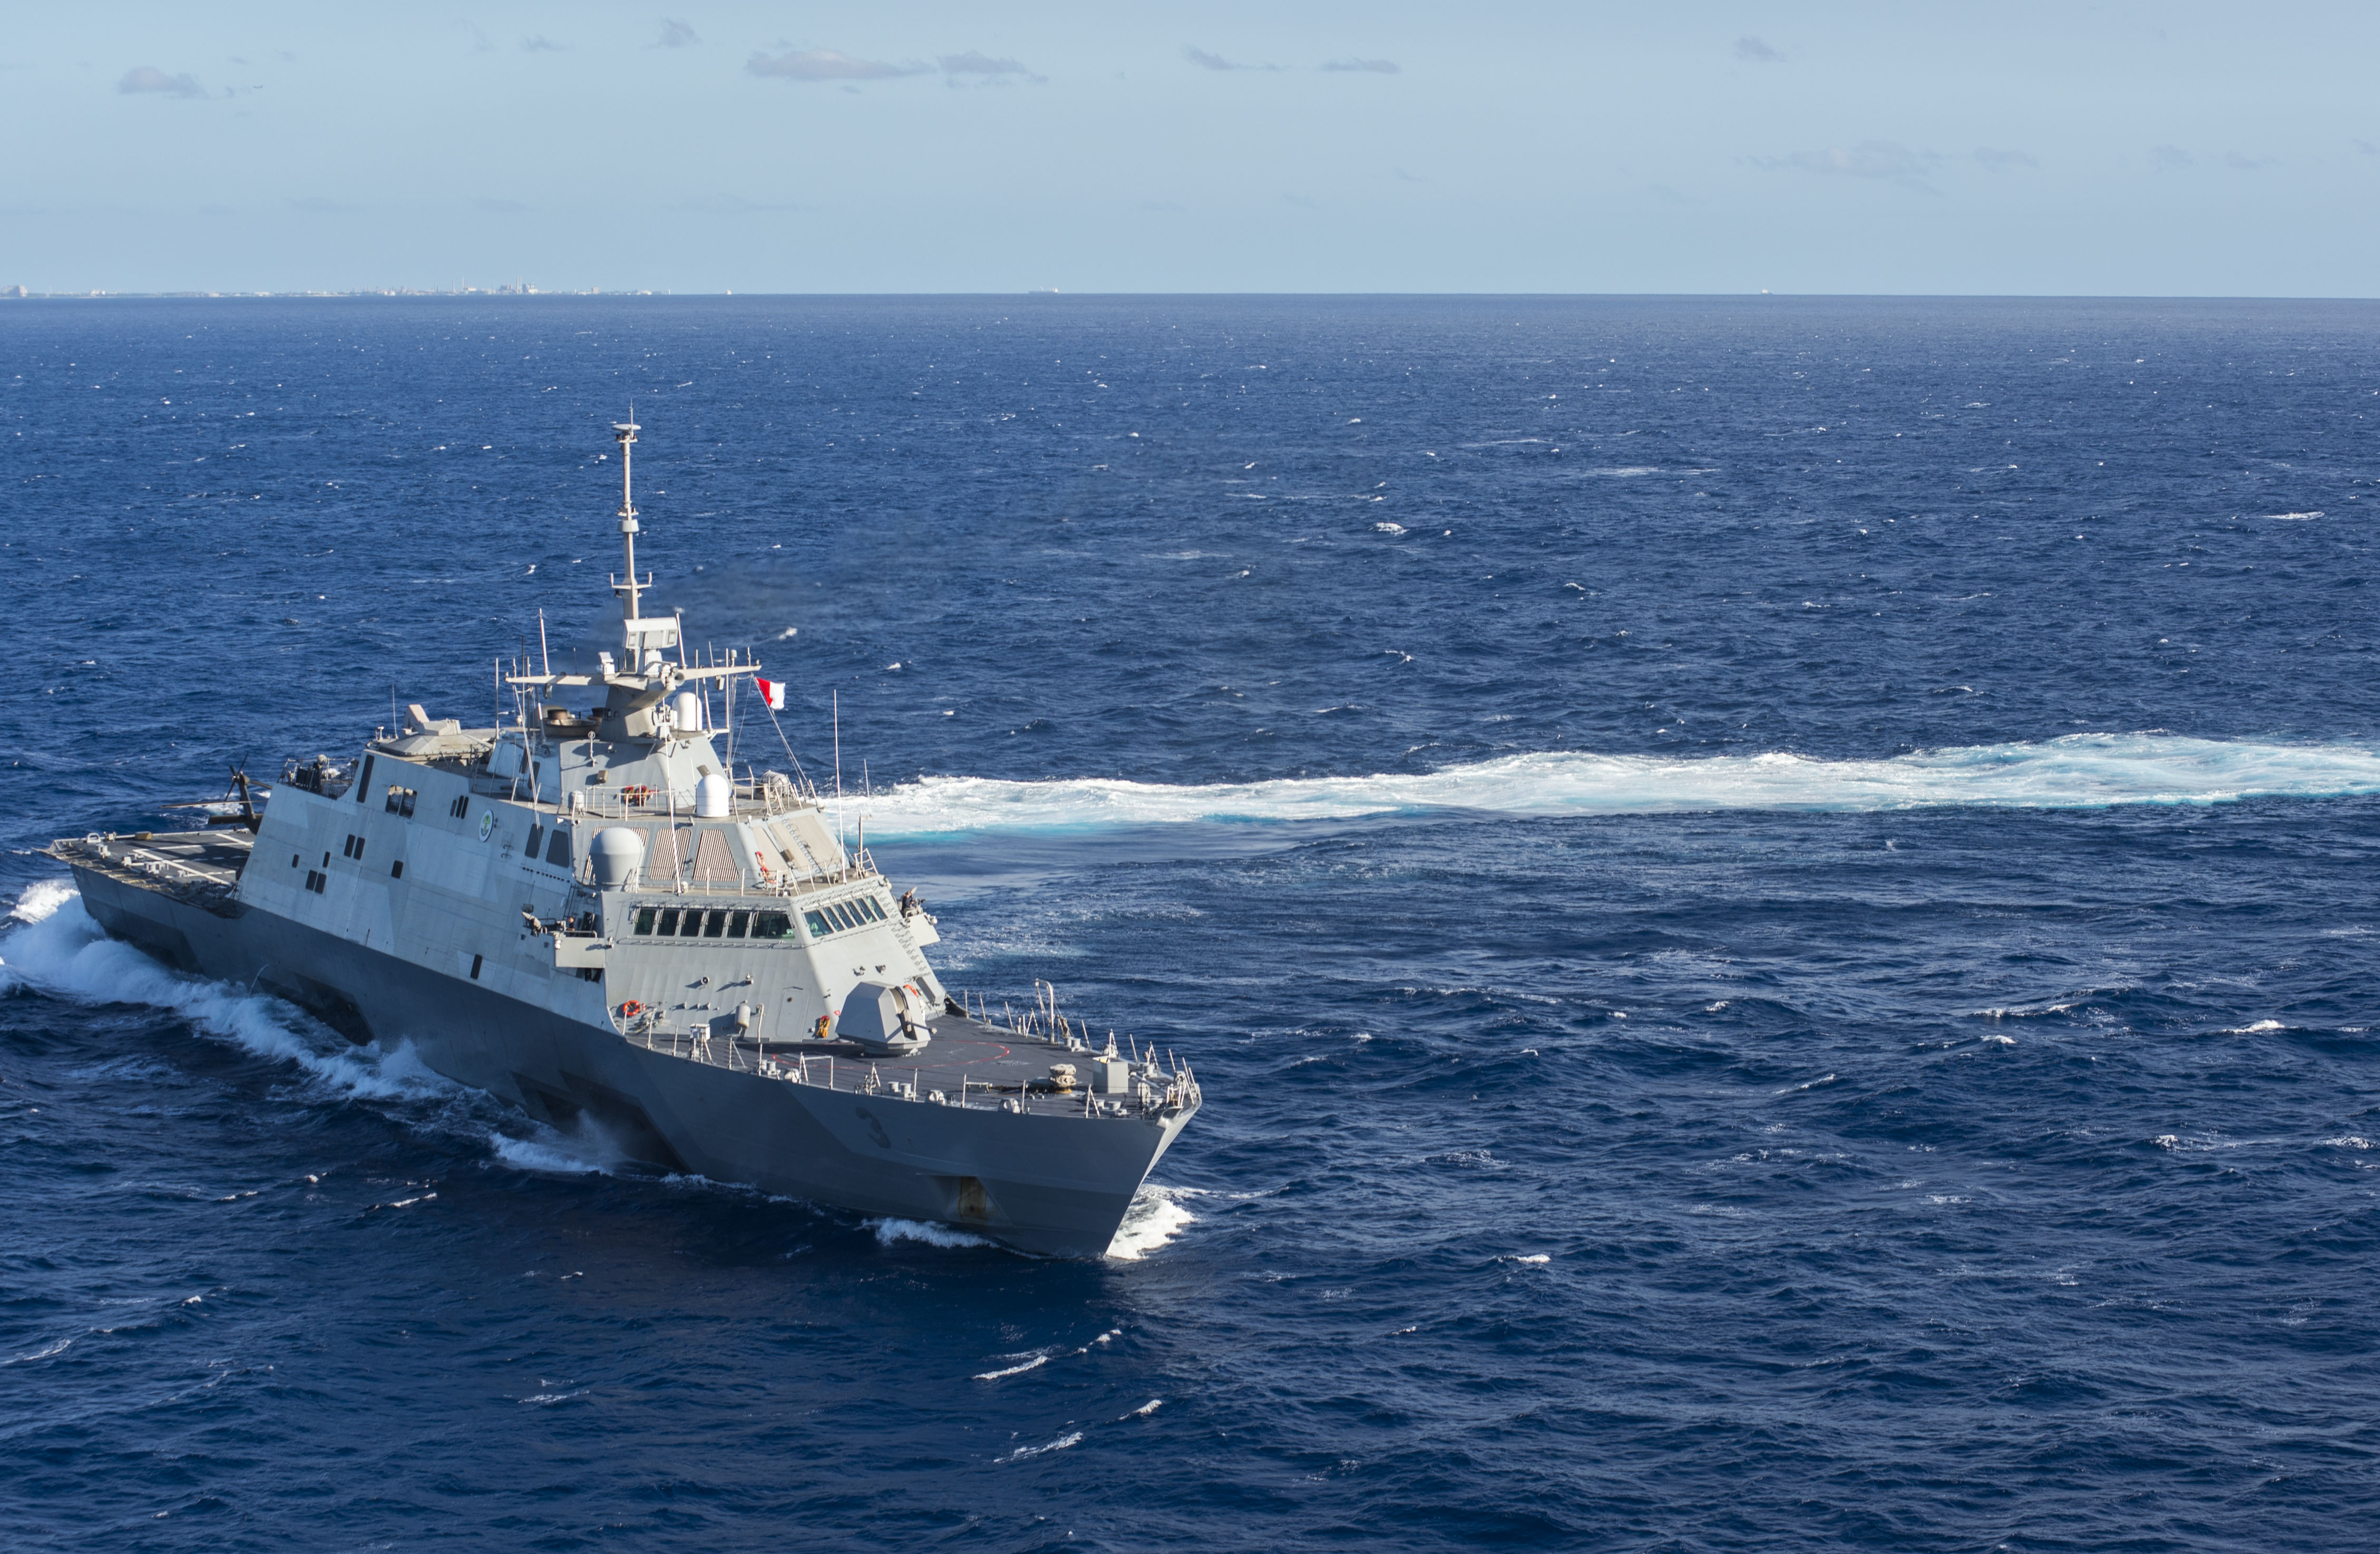 PACIFIC OCEAN (Nov. 25, 2014) The littoral combat ship USS Fort Worth (LCS 3) makes a turn while underway in the pacific Ocean. Fort Worth is providing a sea-going platform for a UH-60A Black Hawk helicopter from the U.S. Army 25th Combat Aviation Brigade to conduct deck landing qualifications off the coast of Hawaii. Fort Worth departed is on a 16-month rotational deployment to Southeast Asia in support of the Navy’s strategic rebalance to the Pacific. (U.S. Navy photo by Mass Communication Specialist 2nd Class Antonio P. Turretto Ramos/Released)